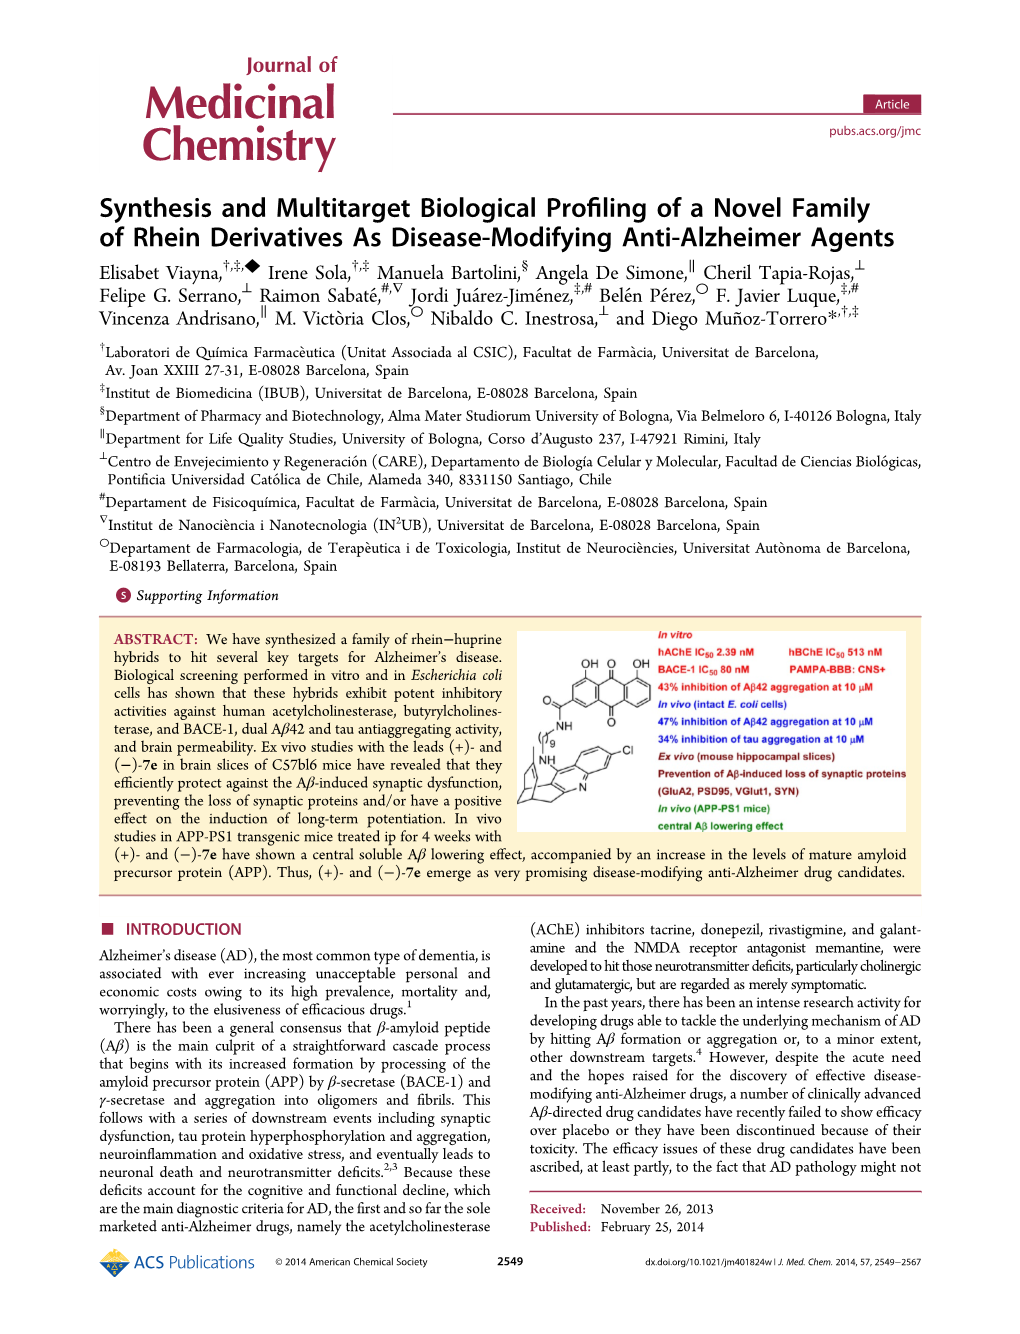 Synthesis and Multitarget Biological Profiling of a Novel Family of Rhein